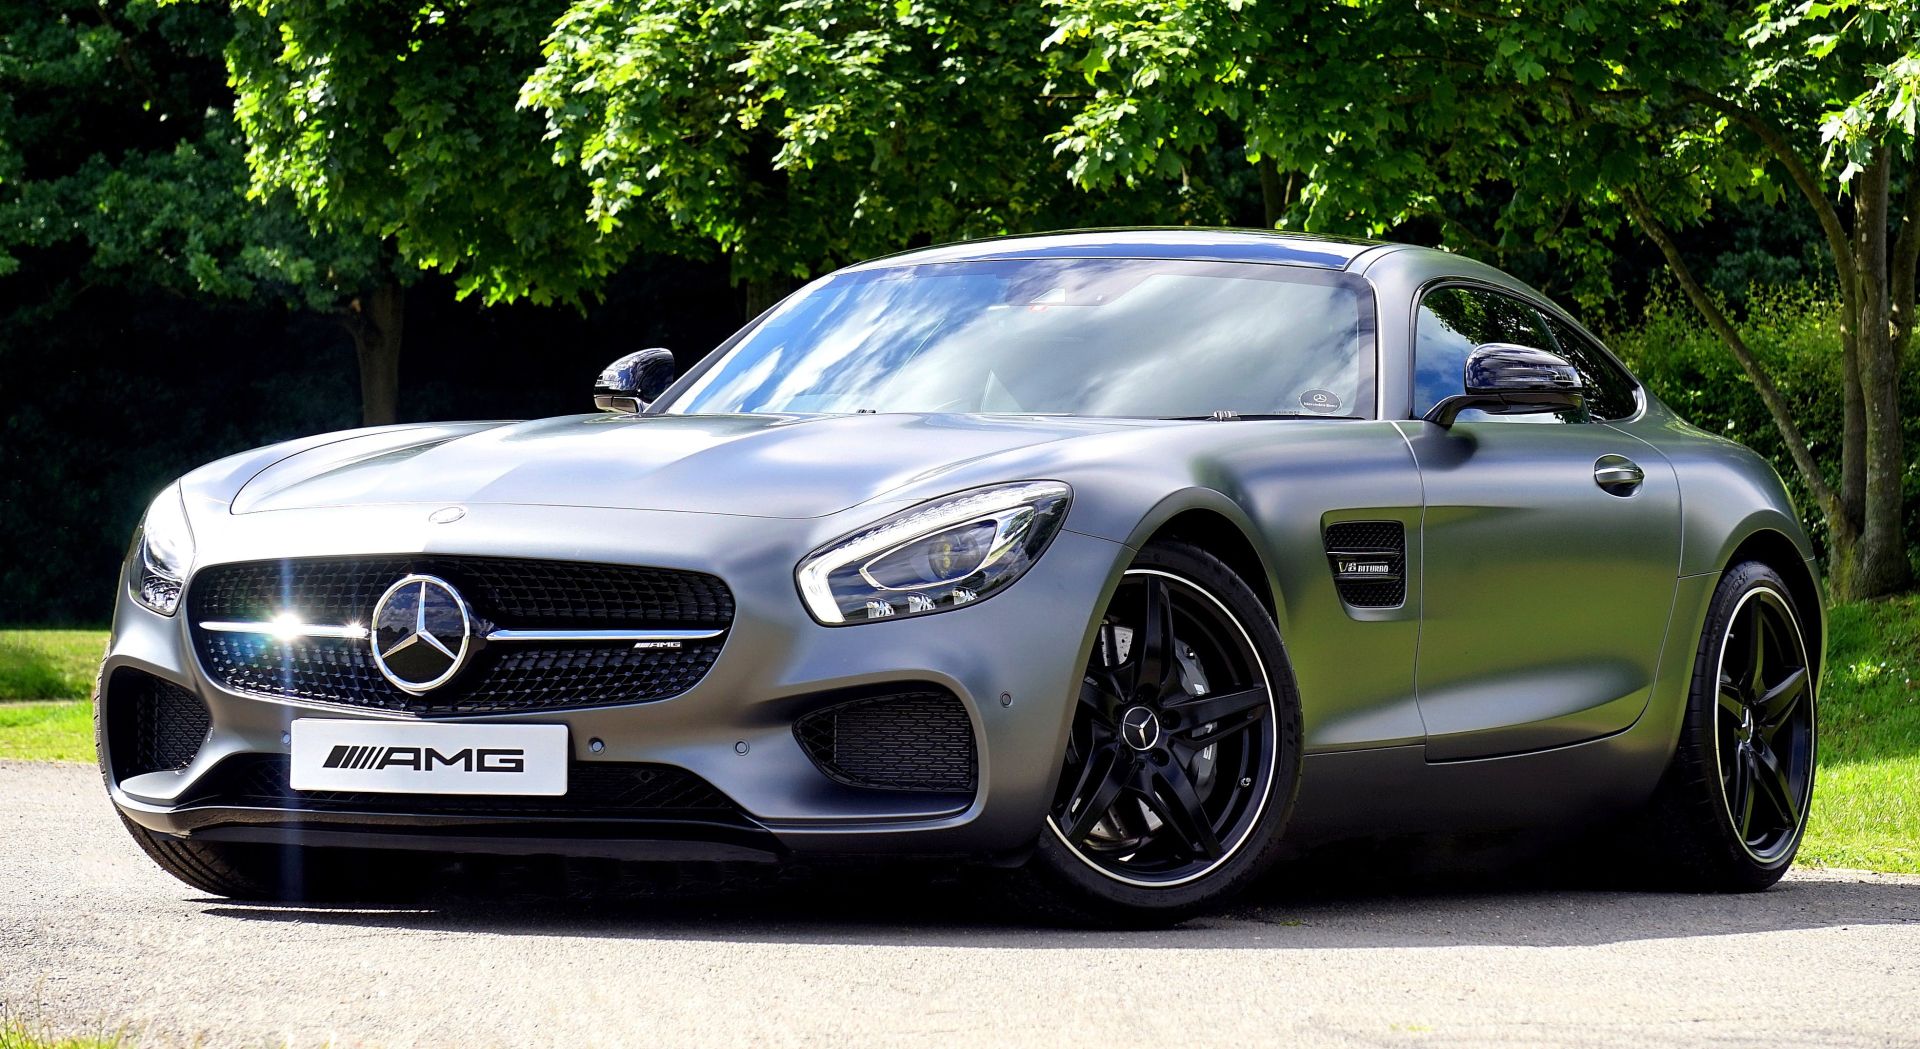 Silver Mercedes-benz Amg Gt Coupe Parked Beside Green Leaf Tree